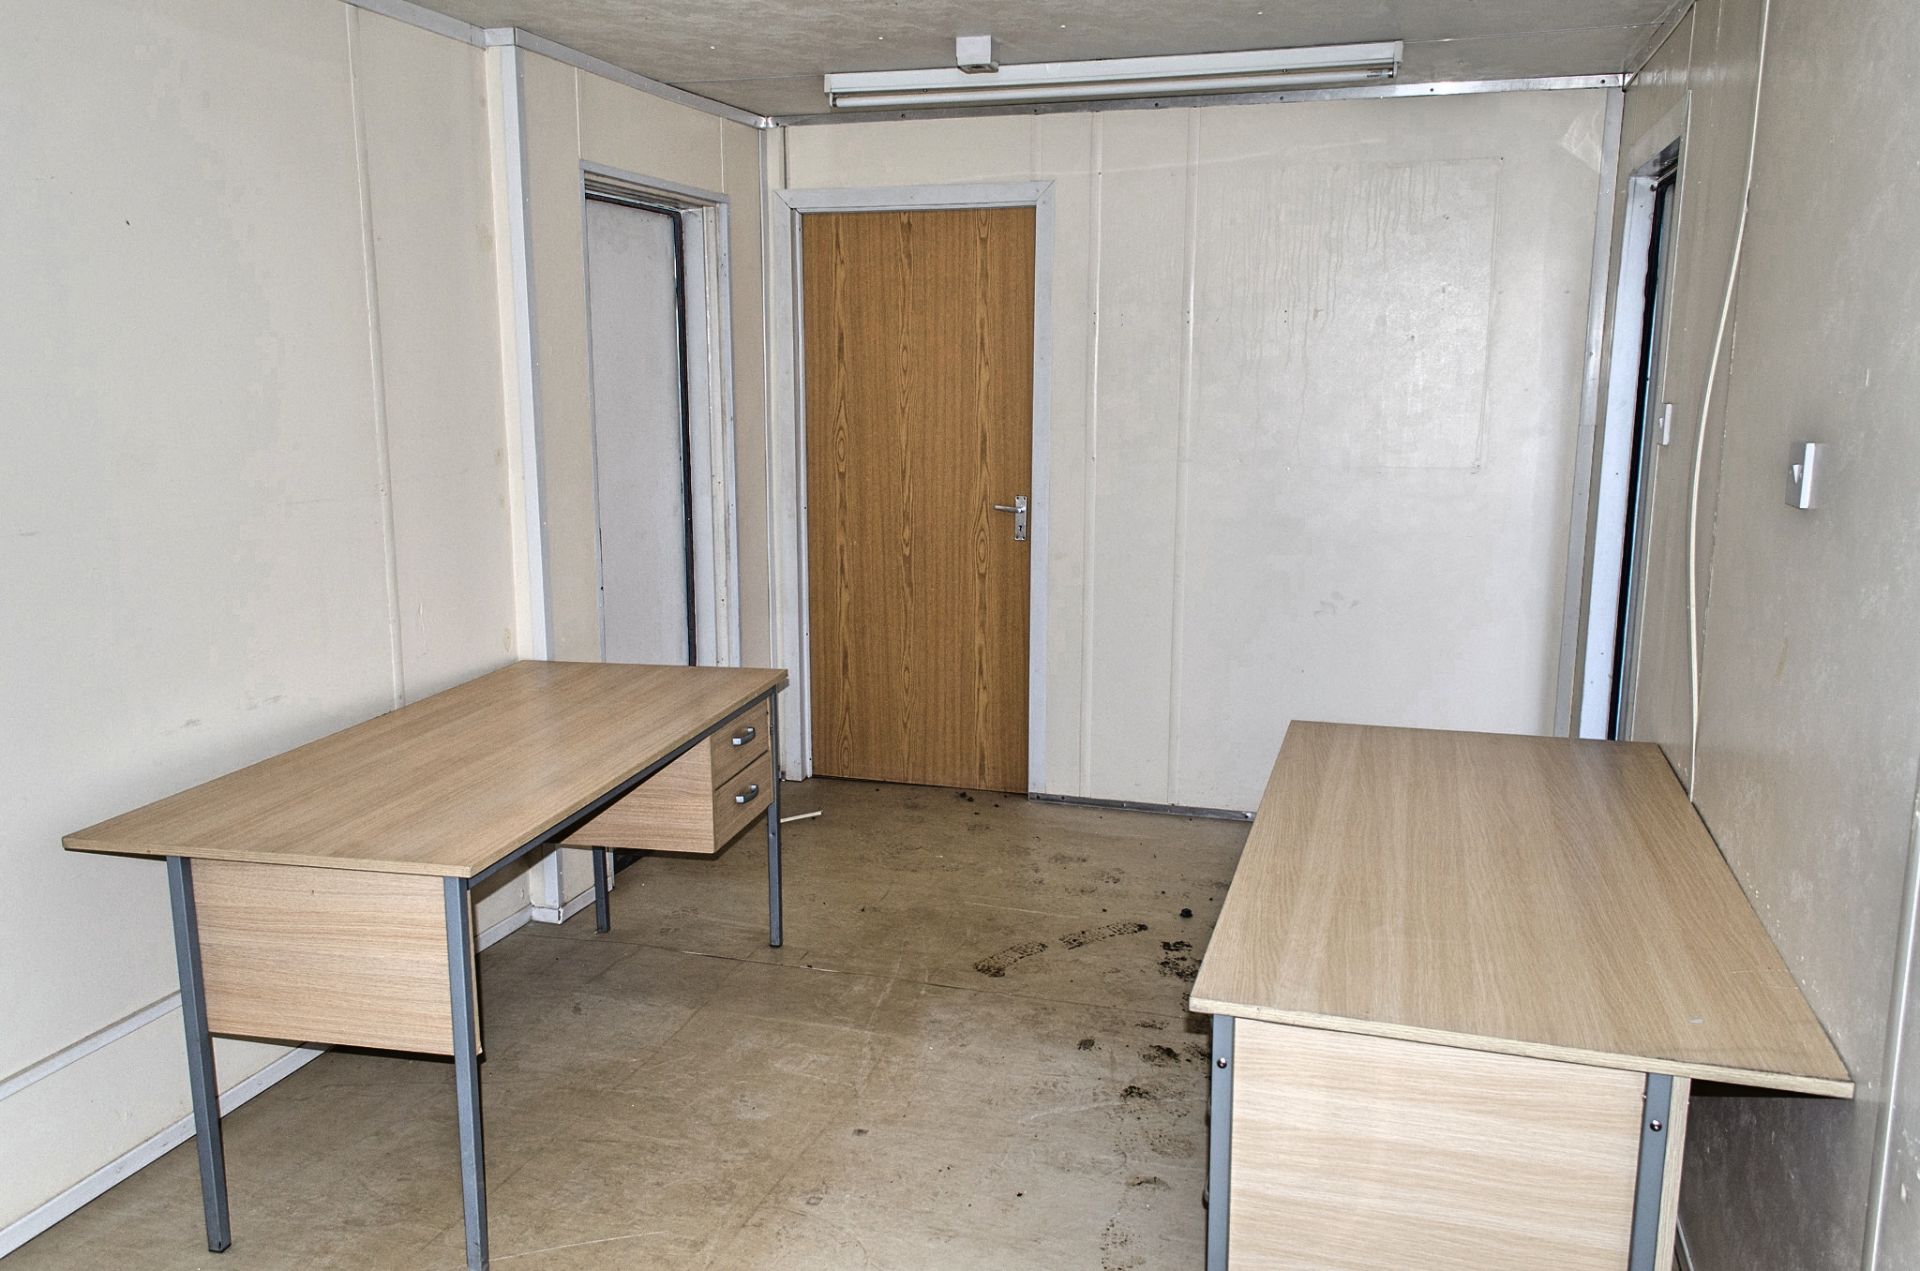 32ft x 10ft steel anti-vandal office site unit Comprising of: kitchen/office area & seperate - Image 6 of 7